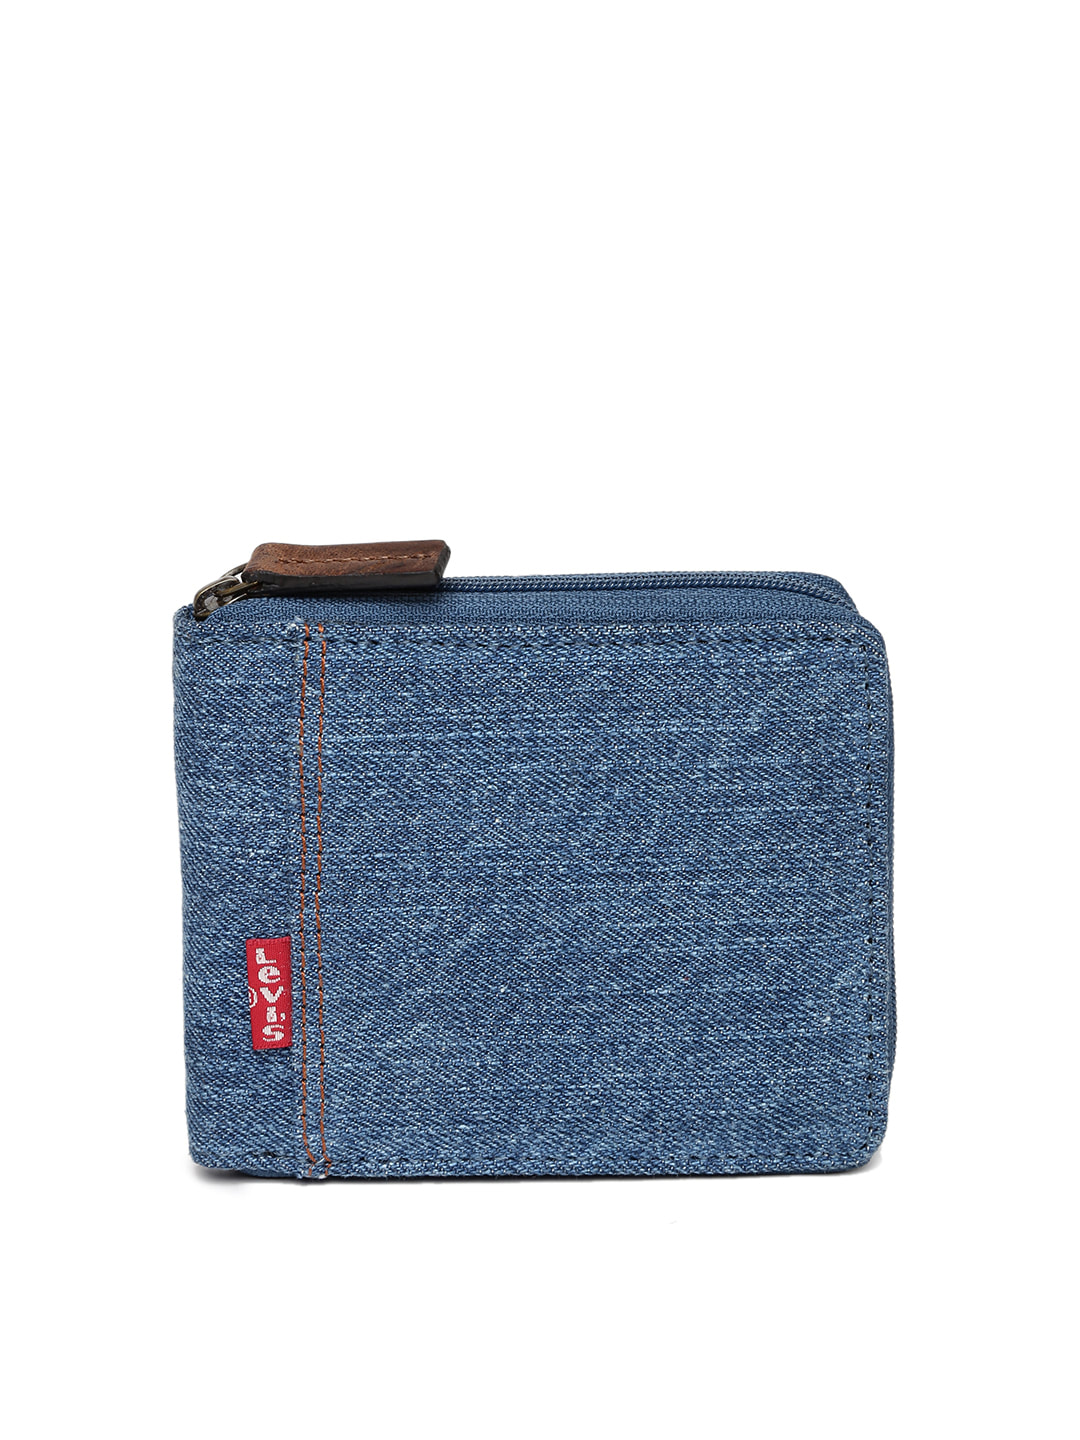 Buy Levis Leather Wallet for Men to suit your style at Best Prices in India  - Recharge1